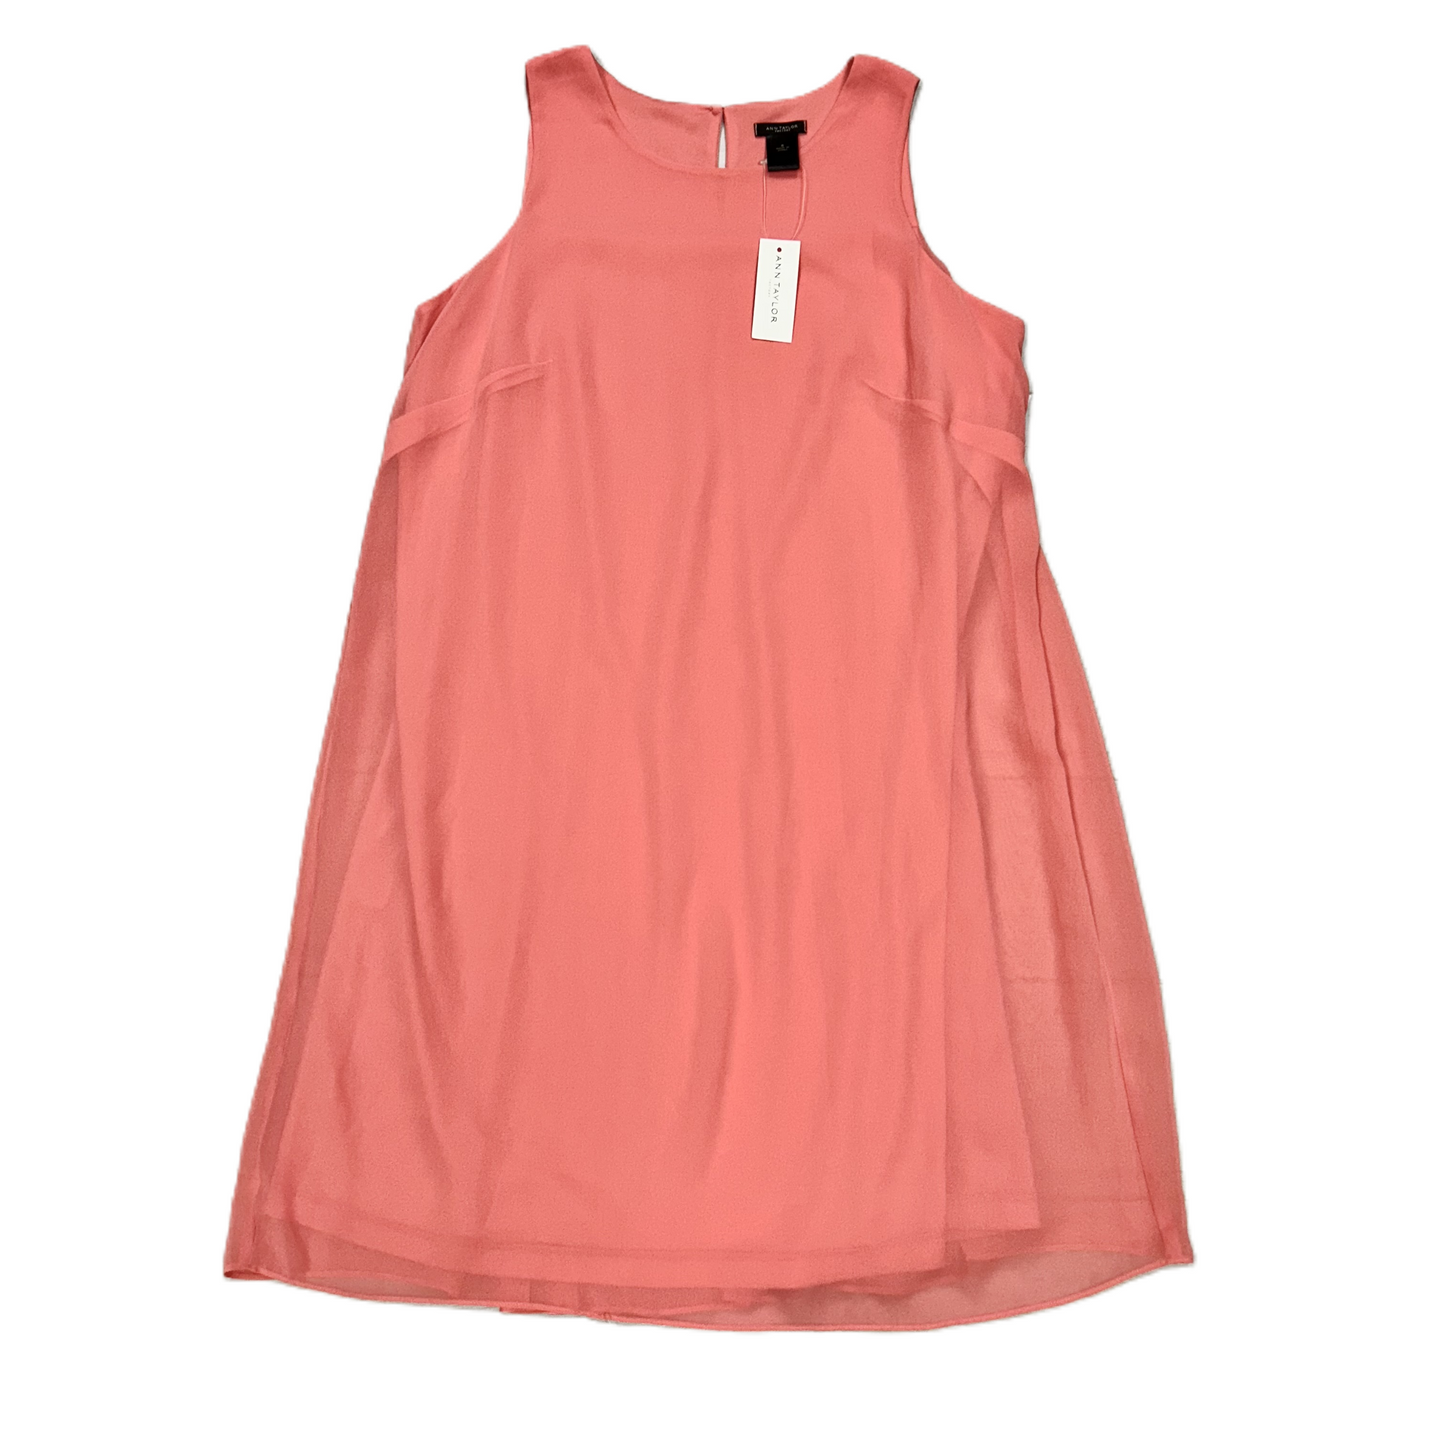 Coral Dress Casual Short By Ann Taylor, Size: M